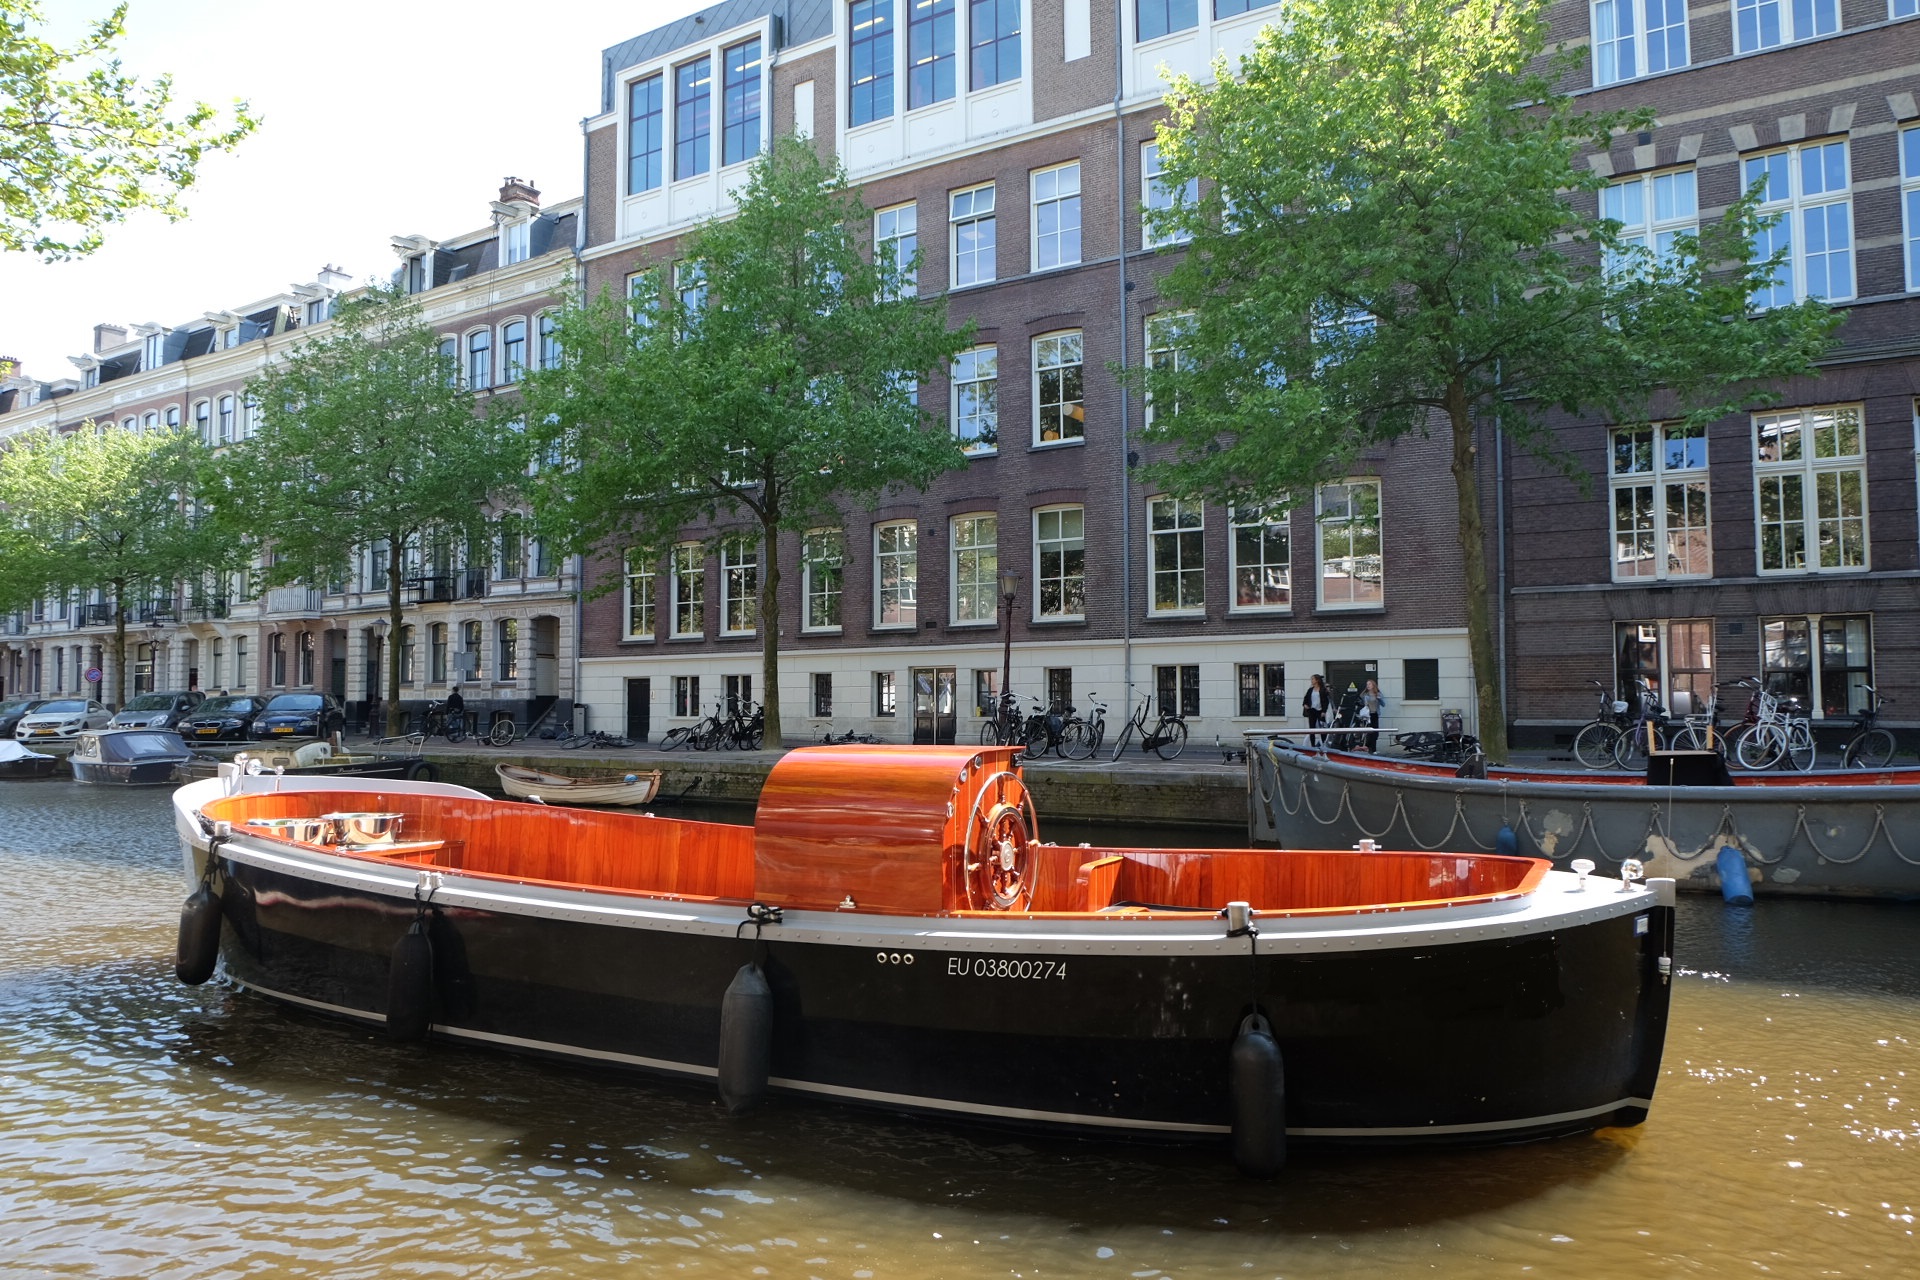 Private Canal Cruise Amsterdam - Vip treatment for any budget